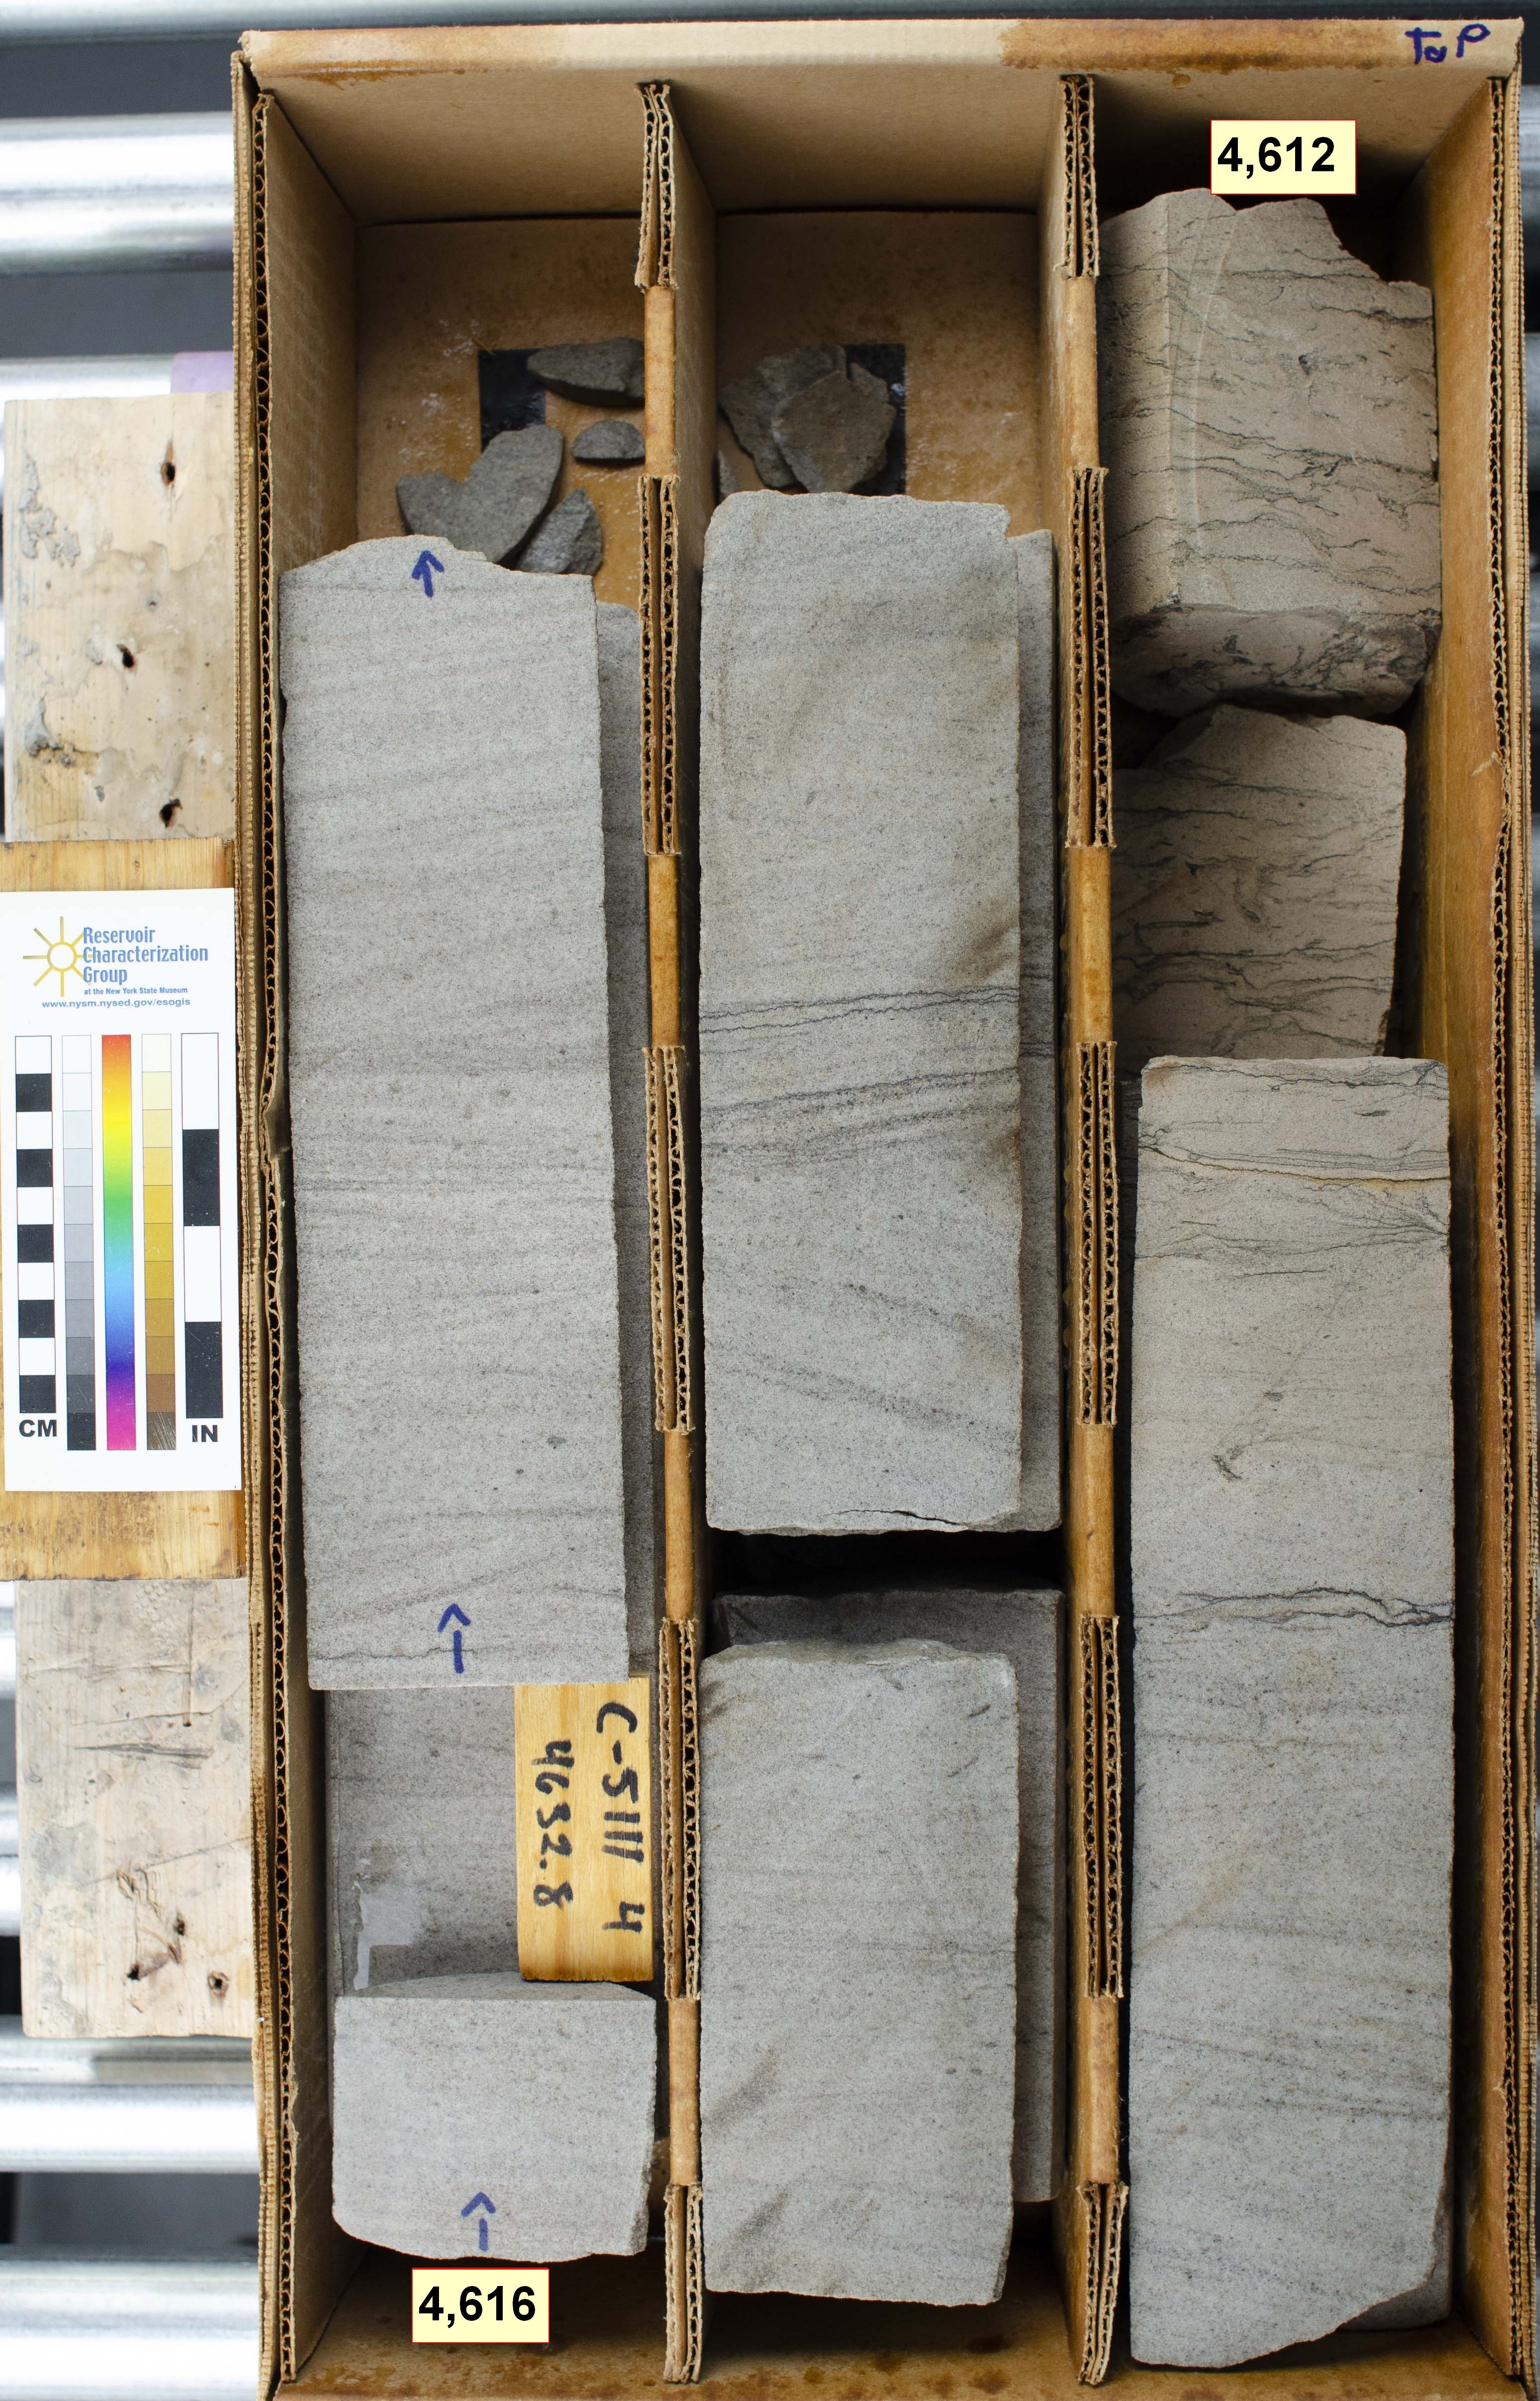 Core 2: Cambrian Rome Formation (cross-bedded and burrowed marine sandstones)